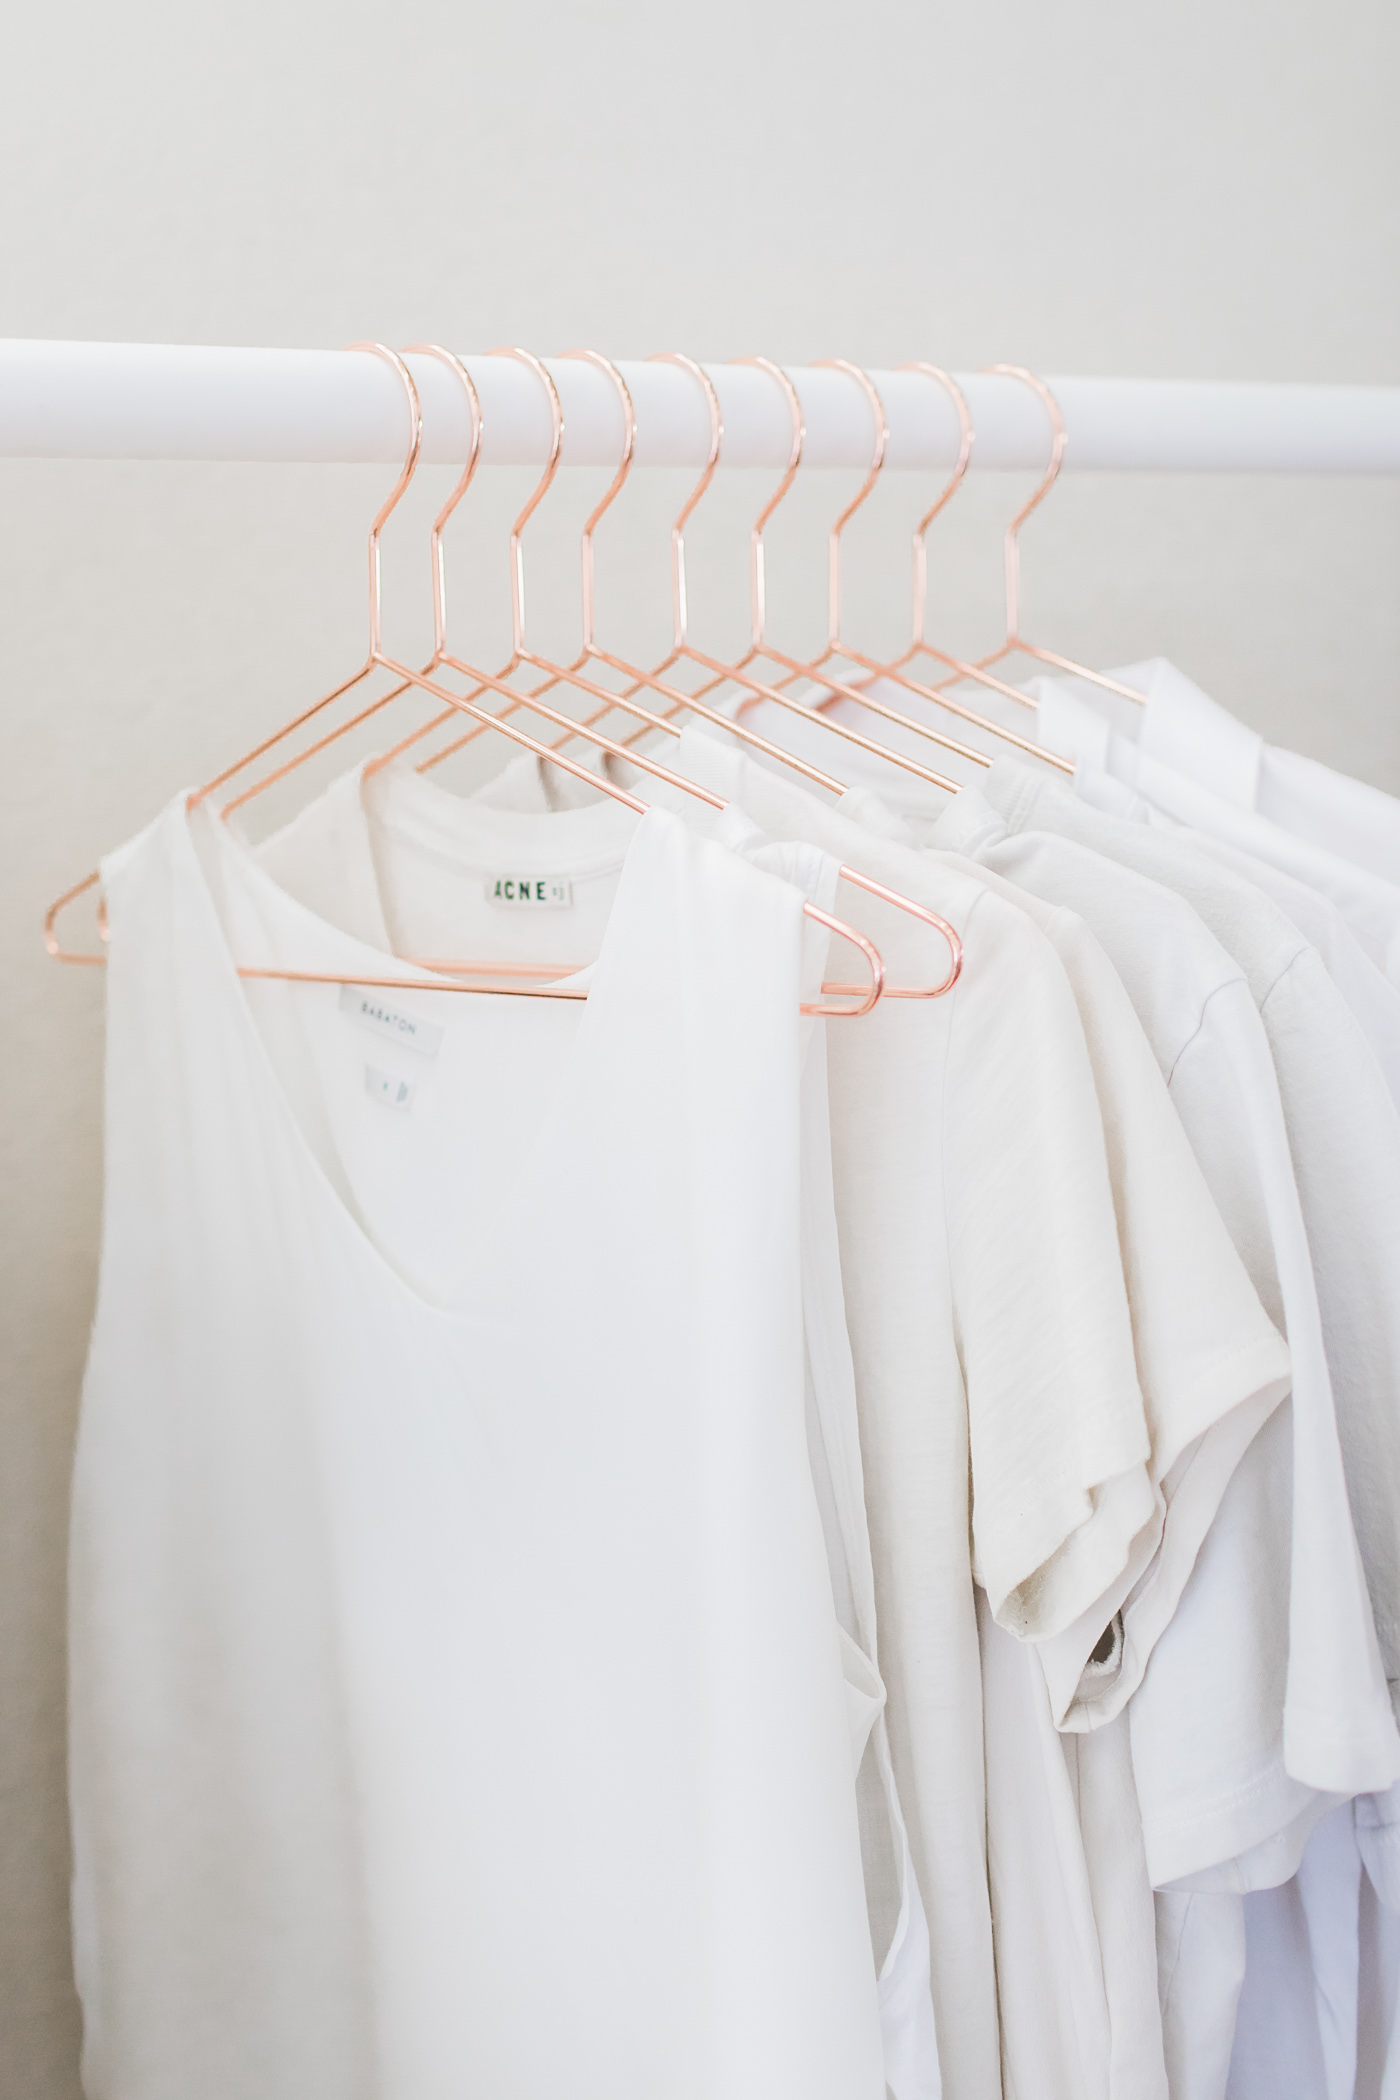 Cleaning duplicates from your closet - 5 questions to ask yourself.